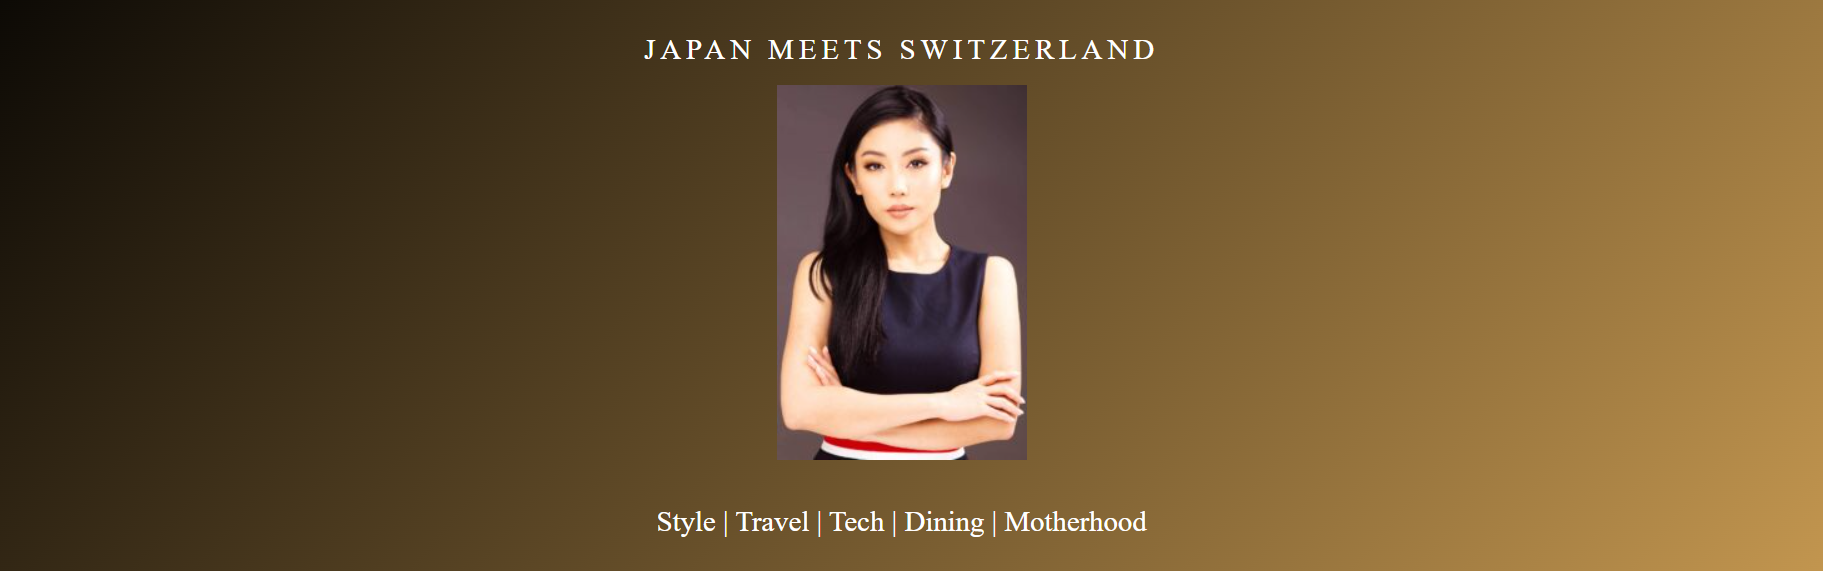 Introduction to Blog “JAPAN MEETS SWITZERLAND”